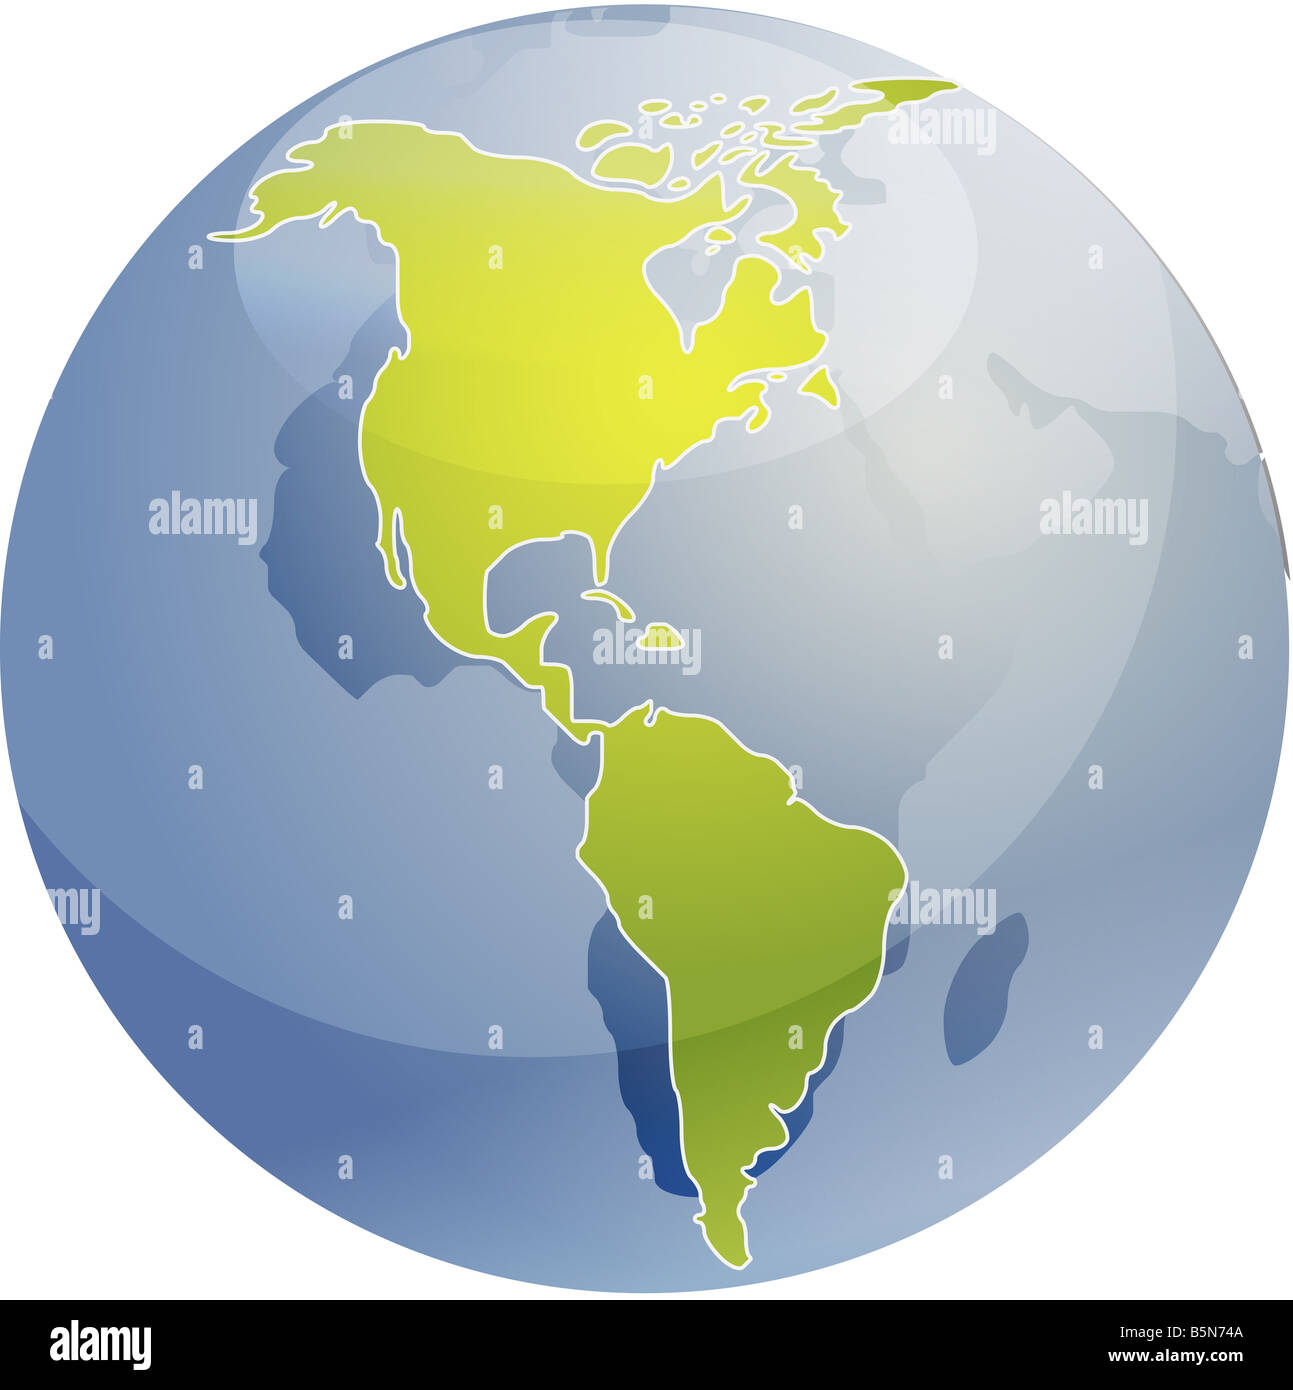 Map of the Americas on a sperhical globe cartographical illustration Stock Photo